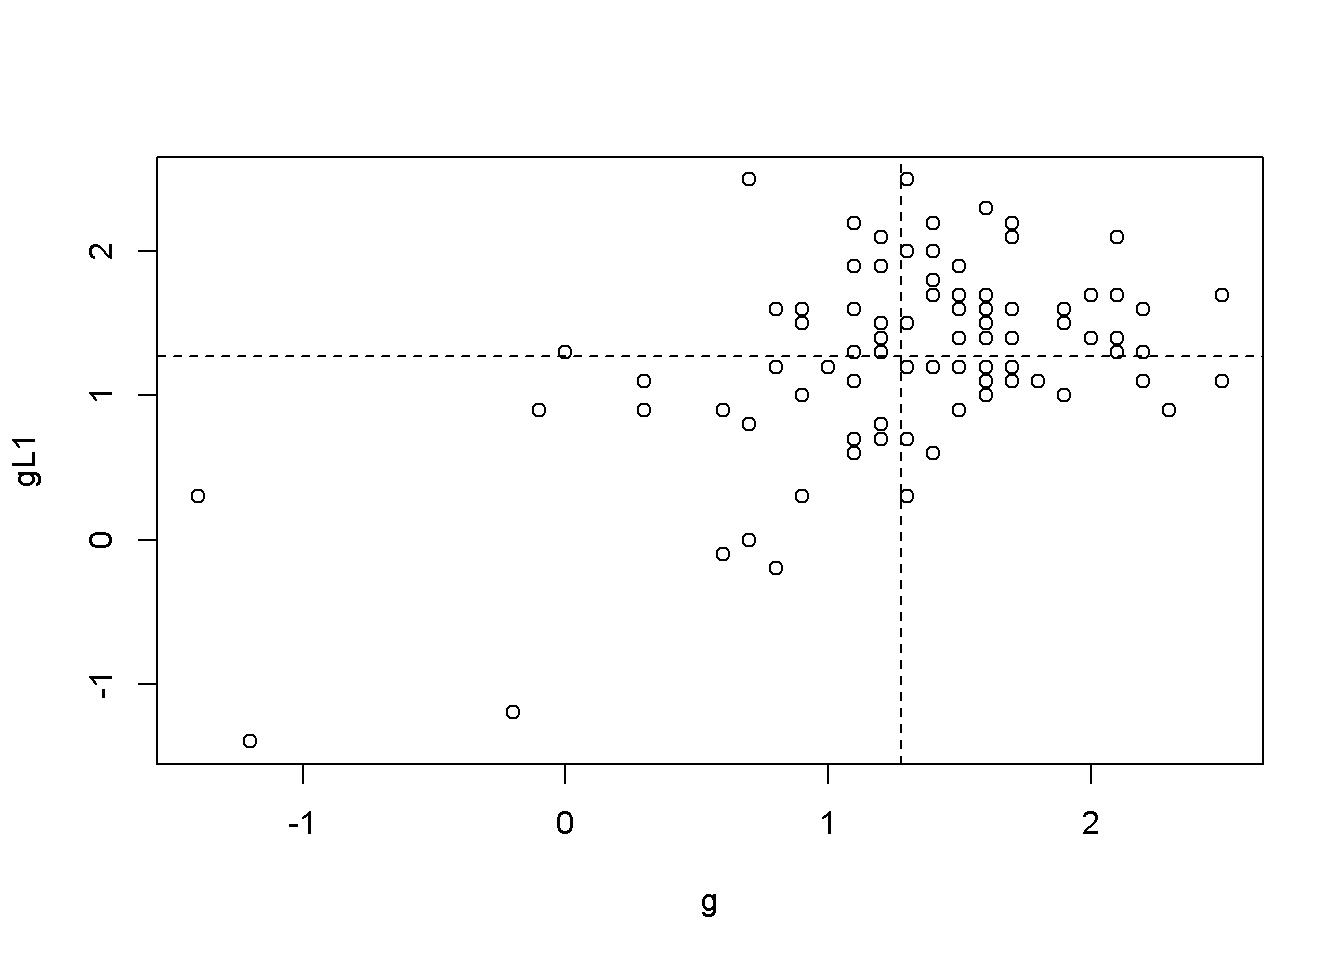 Scatter plots between 'g' and its lags